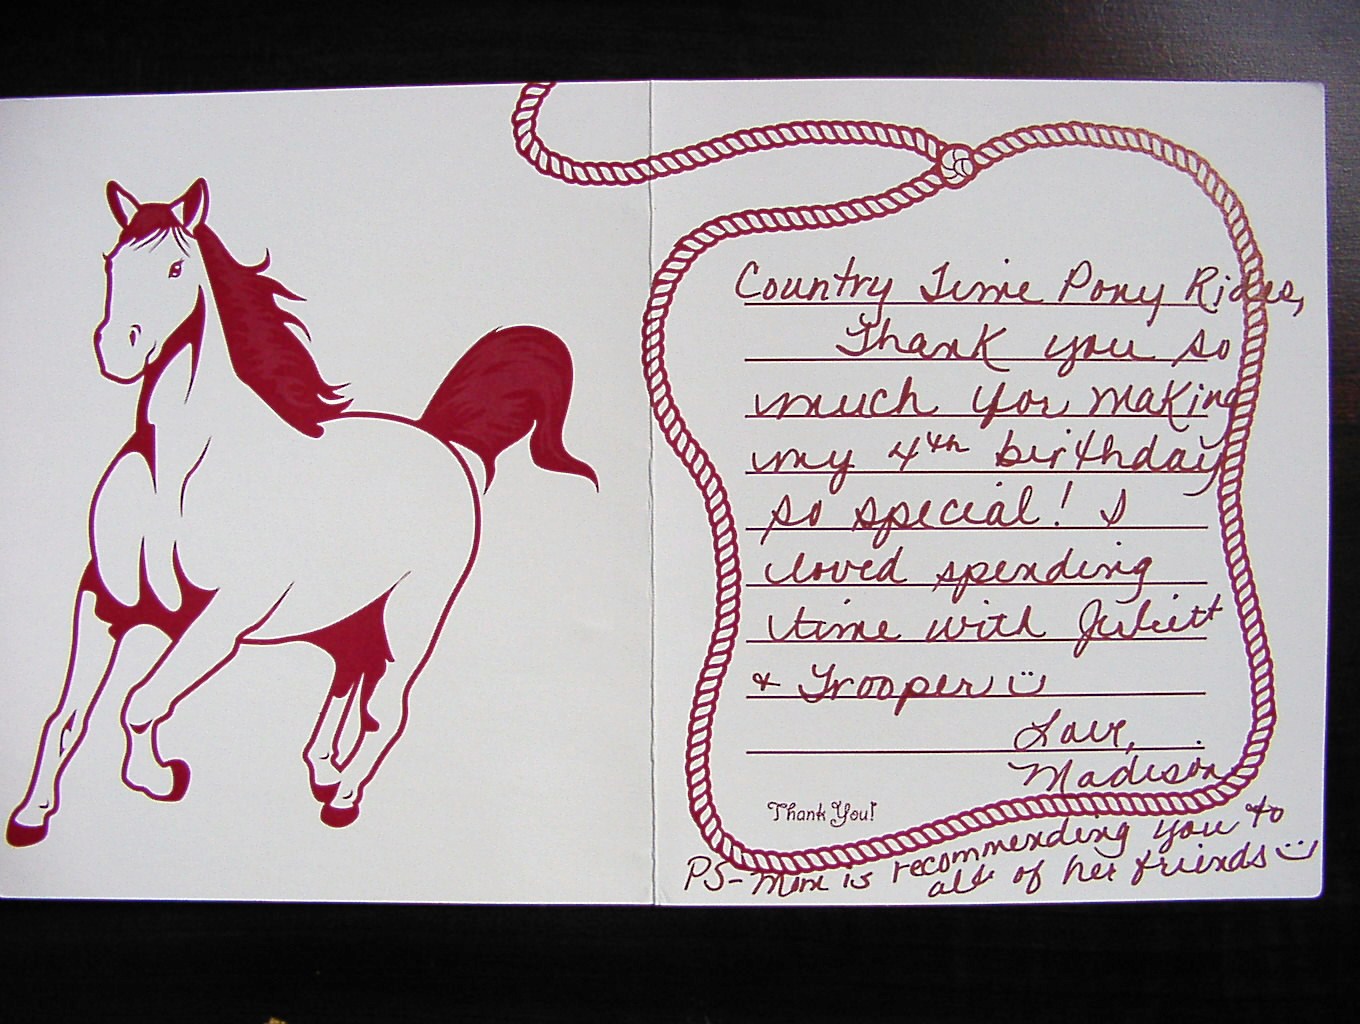 CountryTime Pony Rides - Customer Letter 4